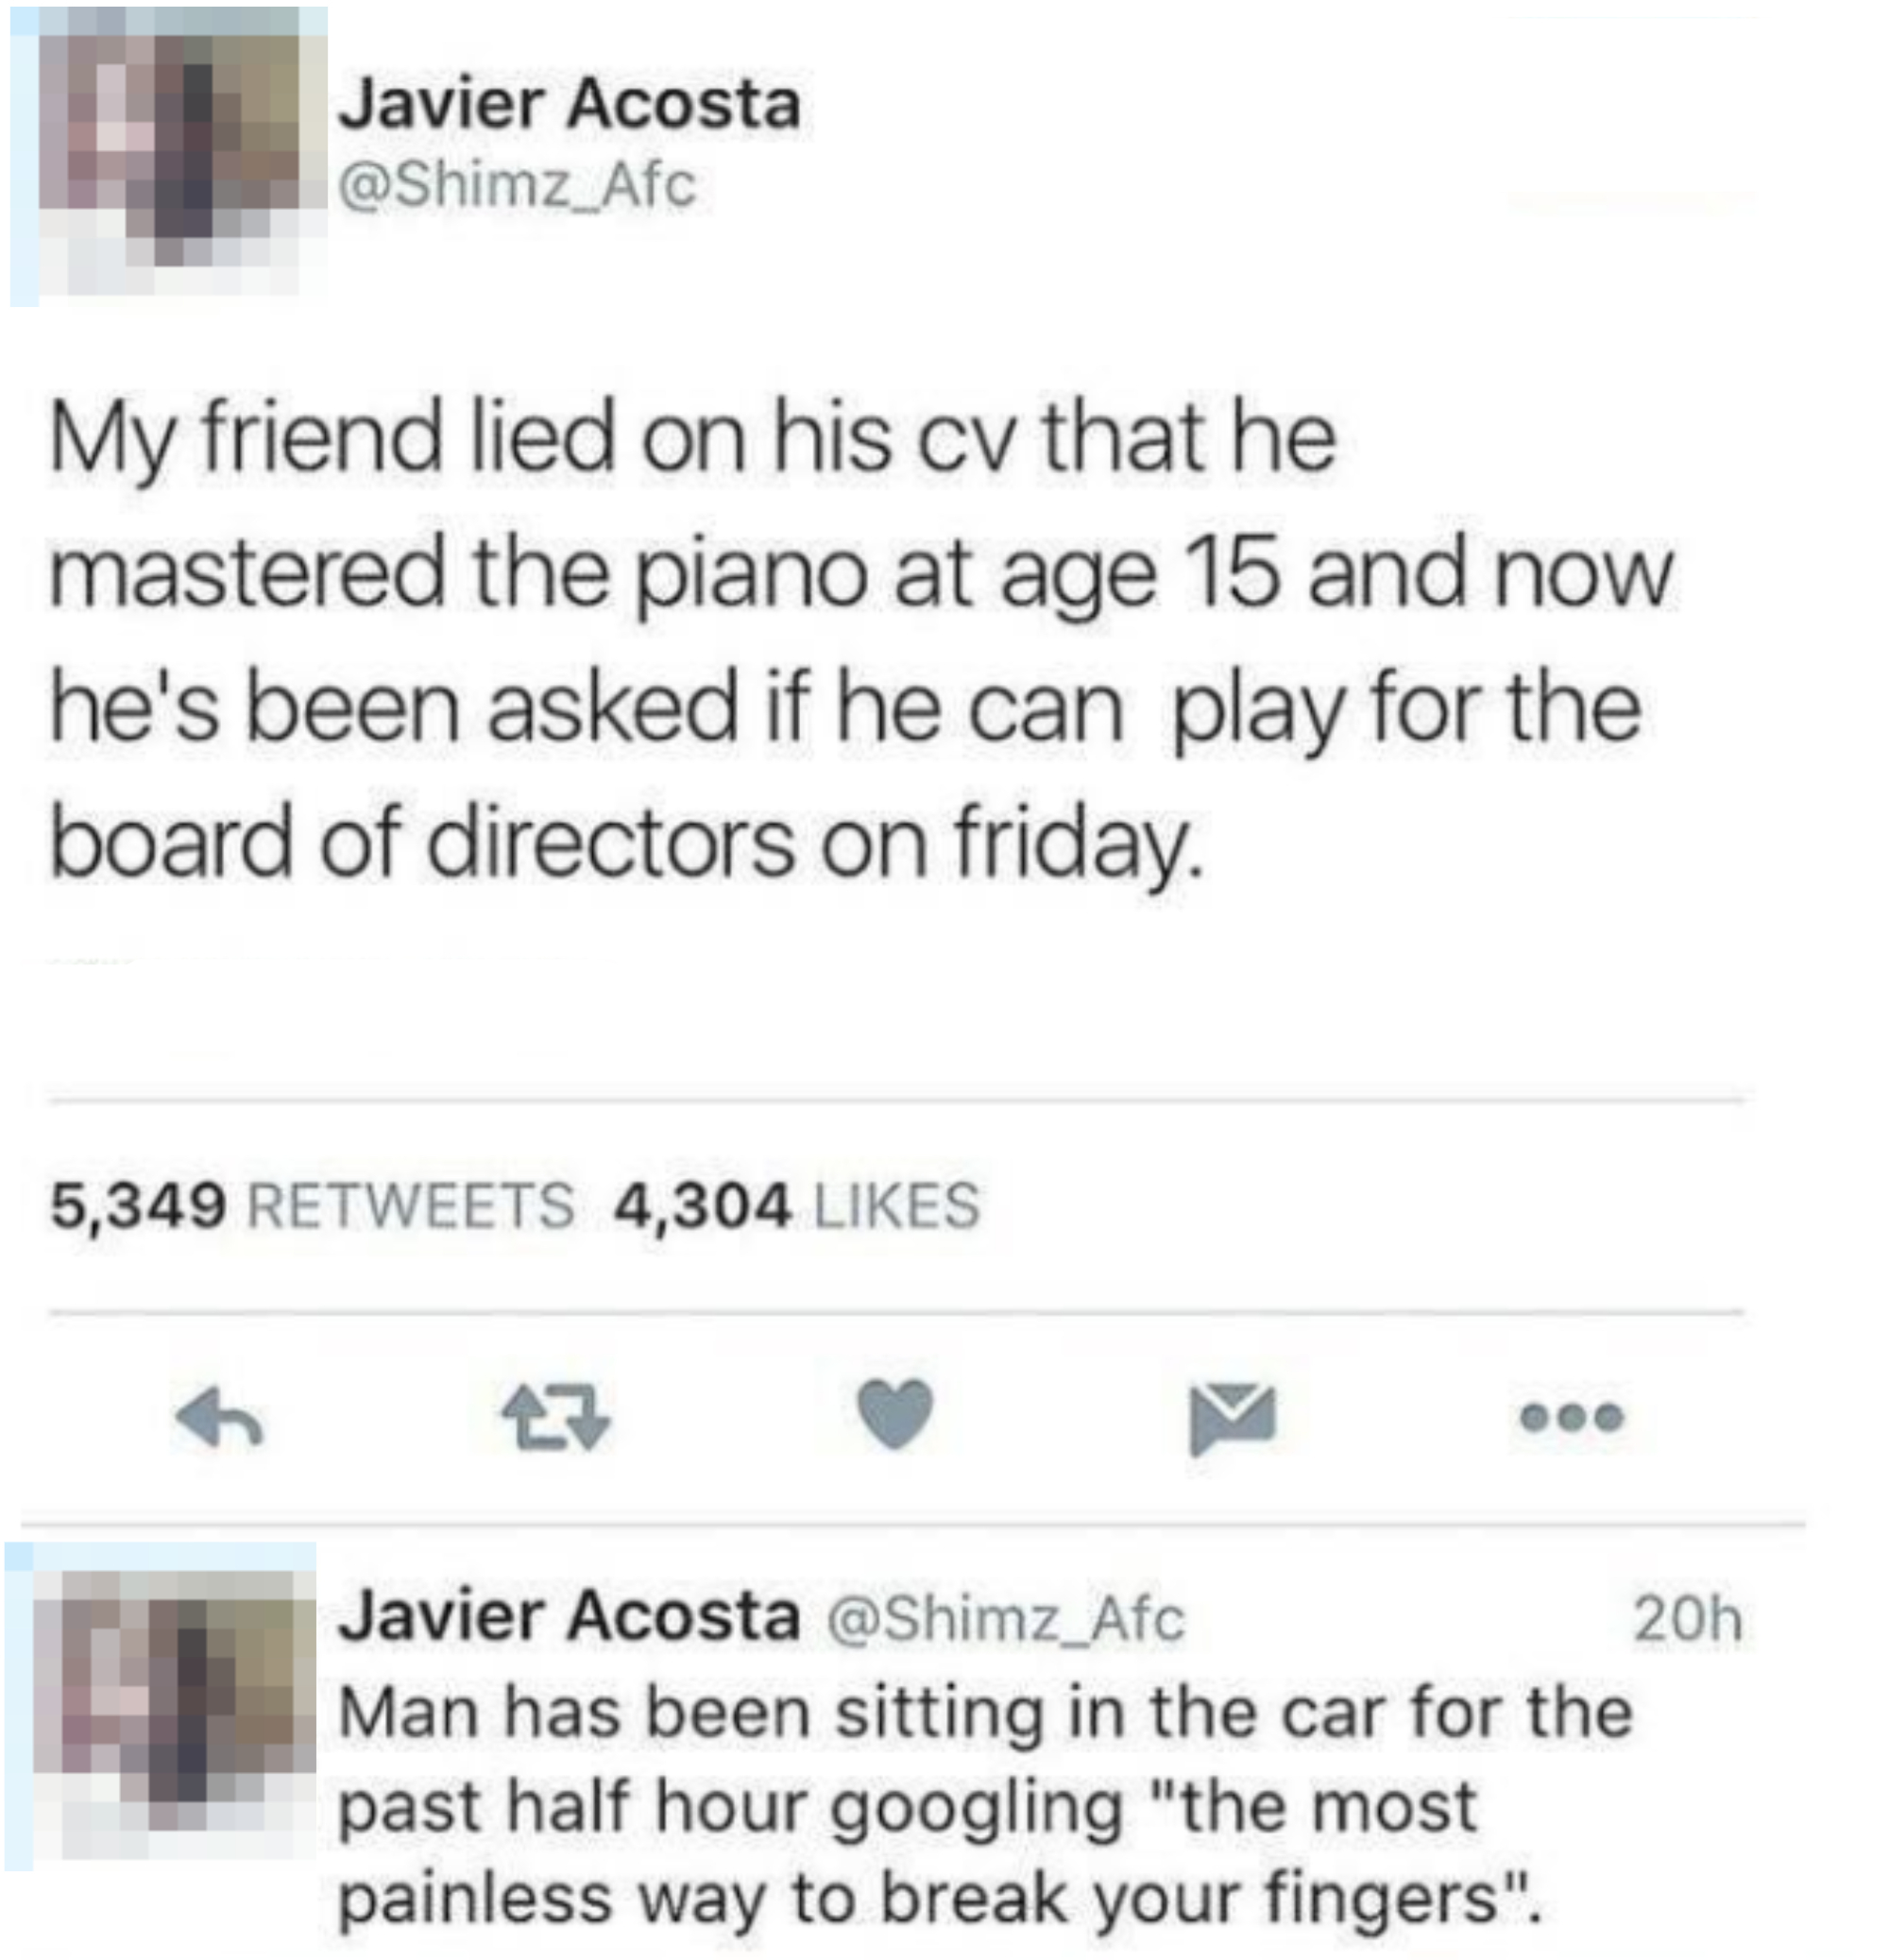 Tweet by Javier Acosta sharing humor about a friend lying on a resume, with a sarcastic follow-up tweet about piano-playing skills